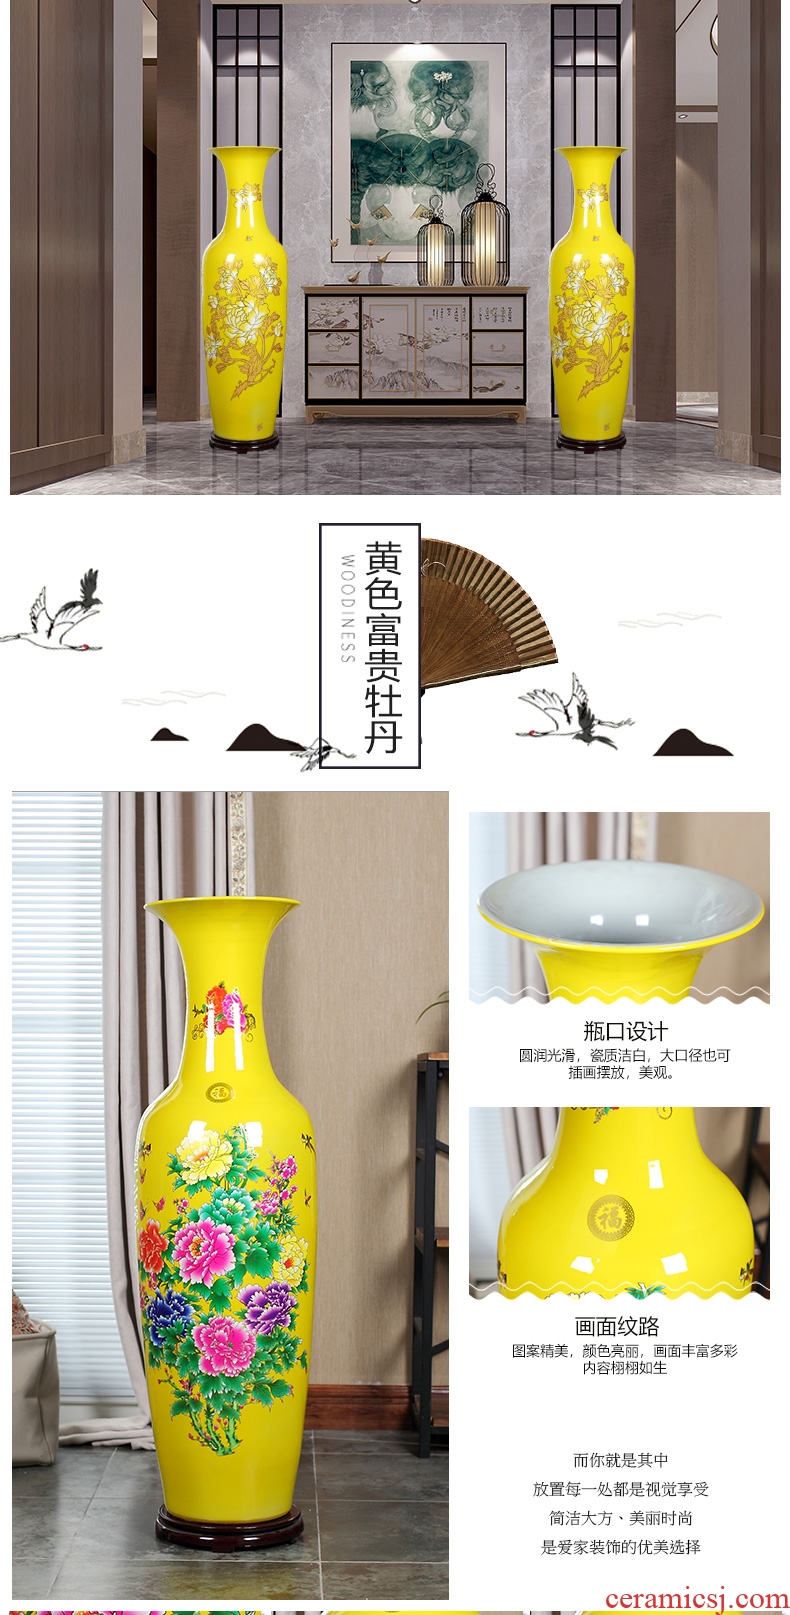 Jingdezhen ceramics red bottle gourd vases large new living room TV cabinet decoration of Chinese style household furnishing articles - 555755421559